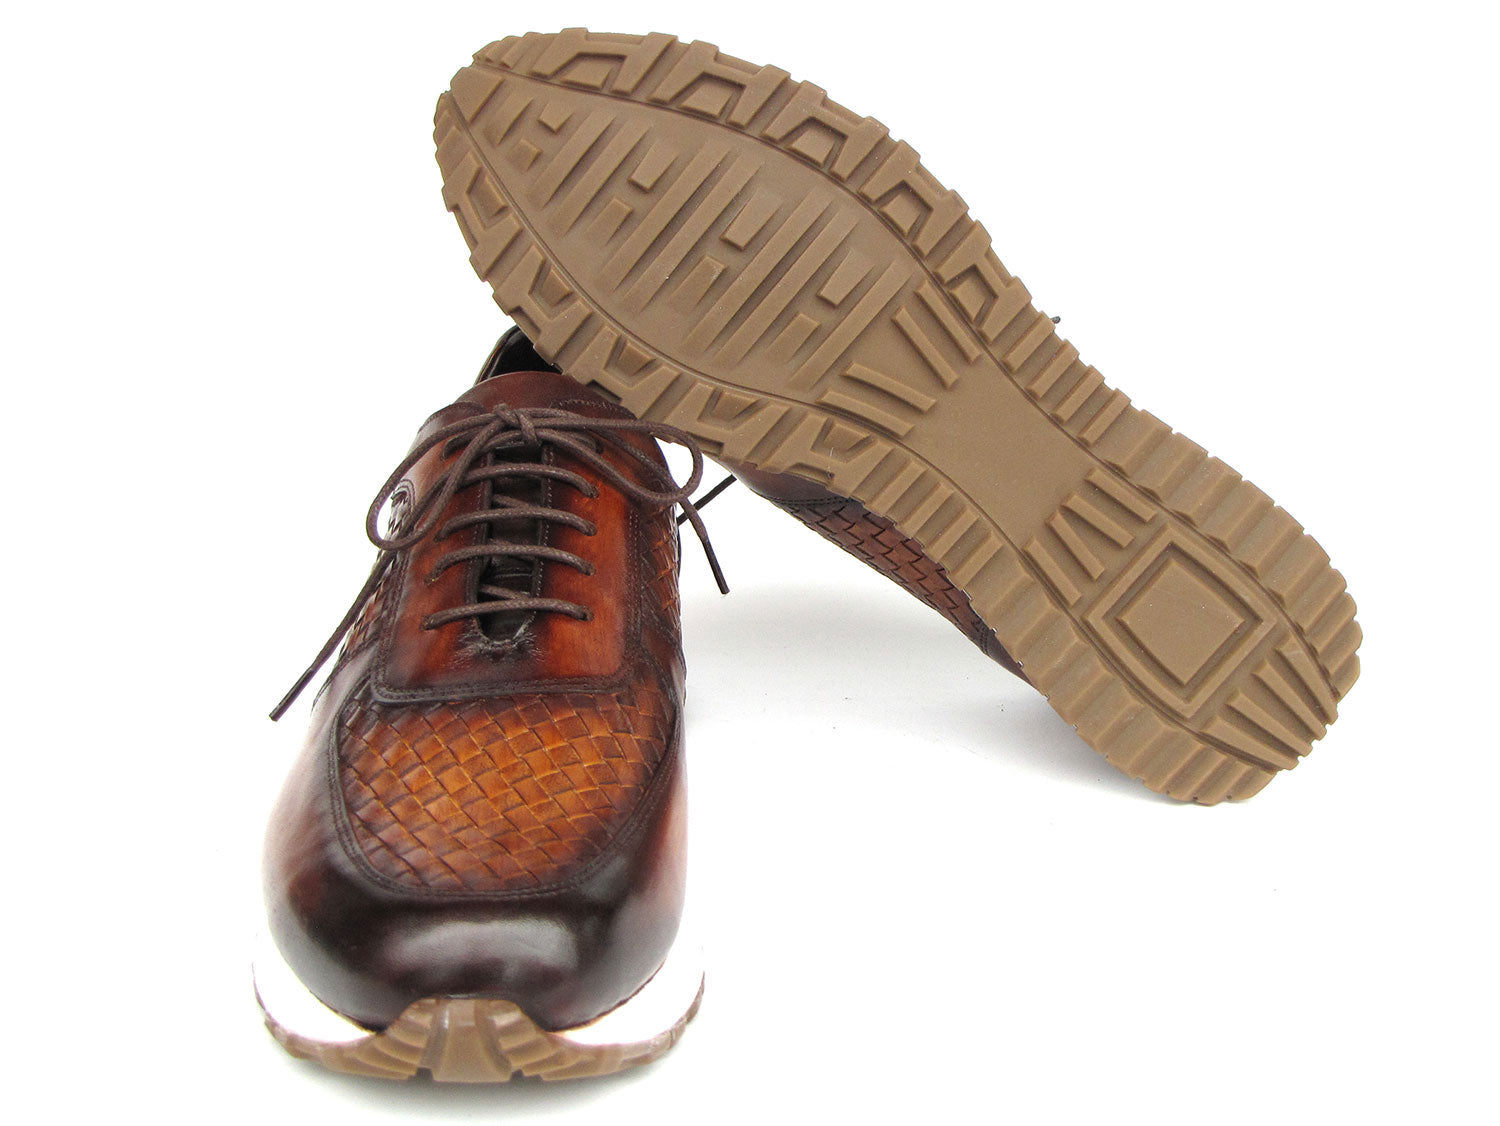 The Sneaker in Woven Brown Leather